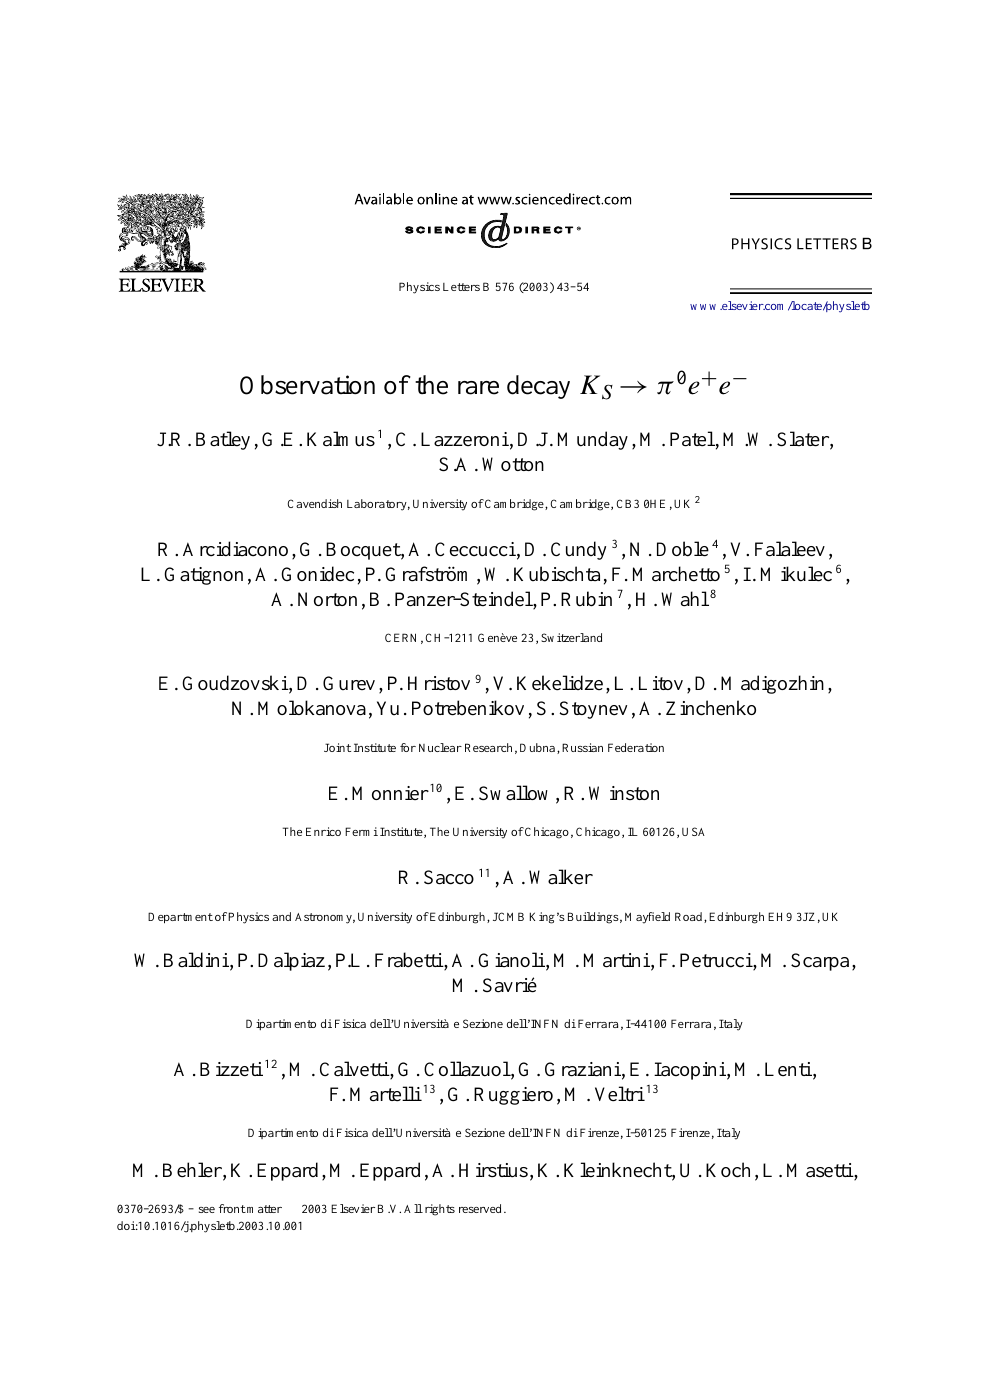 Observation Of The Rare Decay Ks P0e E Topic Of Research Paper In Physical Sciences Download Scholarly Article Pdf And Read For Free On Cyberleninka Open Science Hub